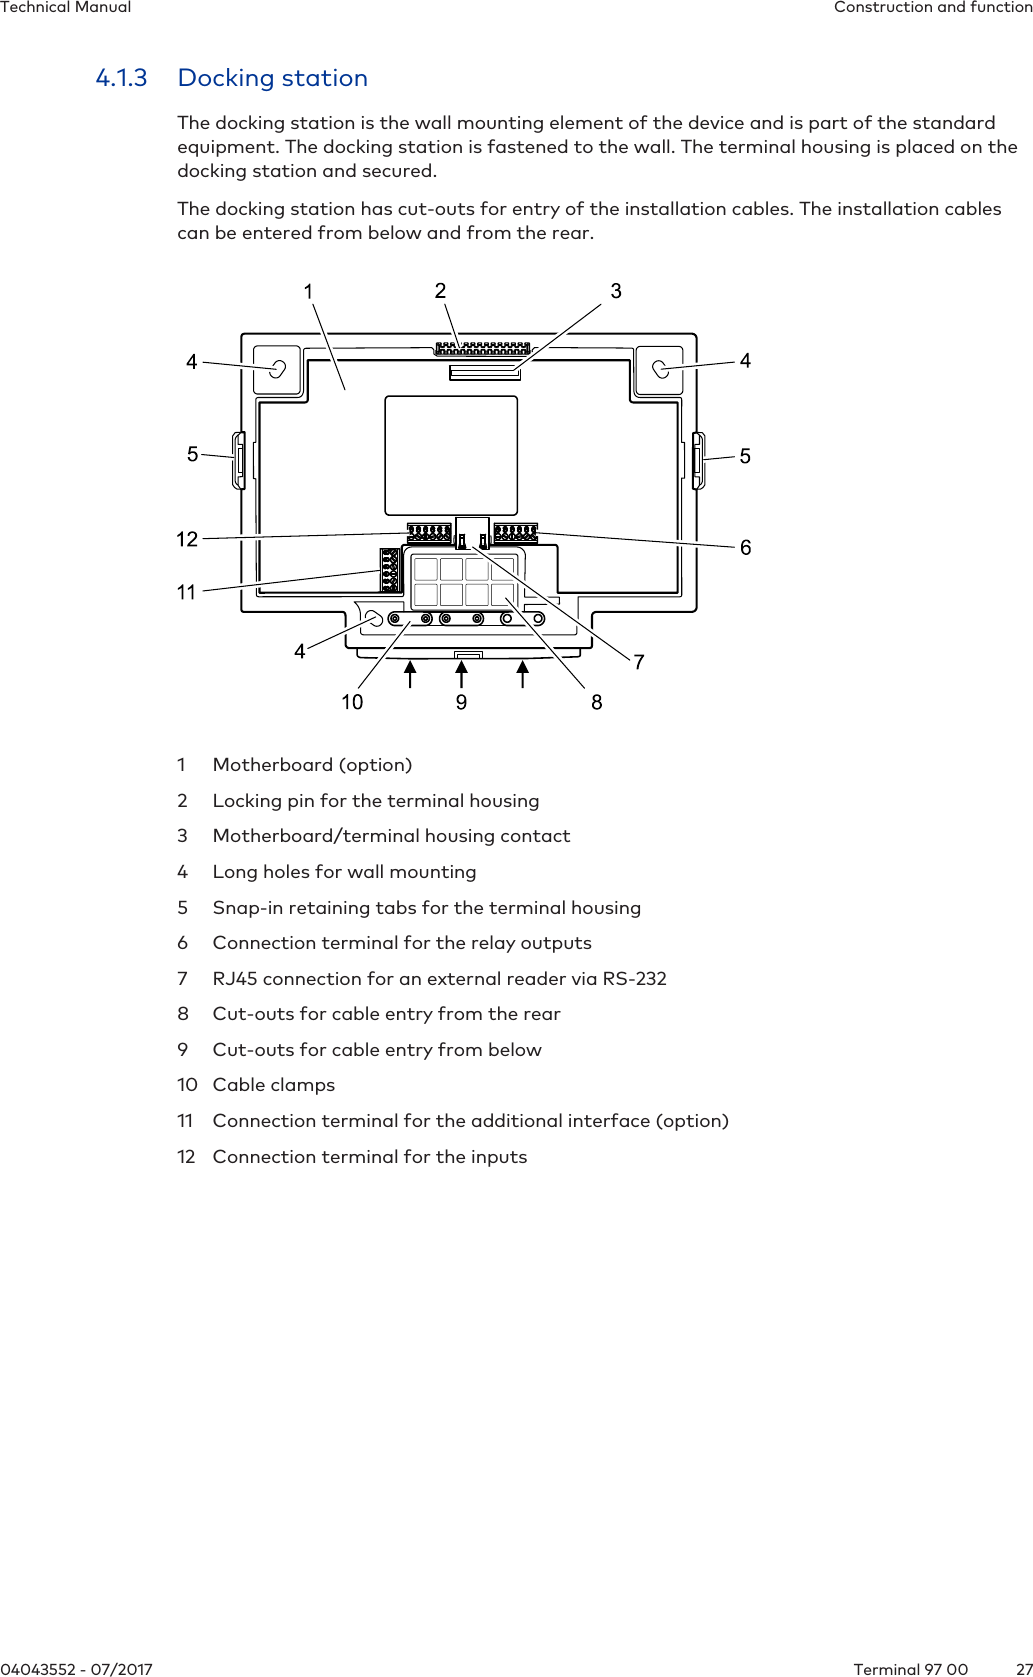 Construction and functionTechnical Manual2704043552 - 07/2017 Terminal 97 004.1.3 Docking stationThe docking station is the wall mounting element of the device and is part of the standardequipment. The docking station is fastened to the wall. The terminal housing is placed on thedocking station and secured.The docking station has cut-outs for entry of the installation cables. The installation cablescan be entered from below and from the rear.1 Motherboard (option)2 Locking pin for the terminal housing3 Motherboard/terminal housing contact4 Long holes for wall mounting5 Snap-in retaining tabs for the terminal housing6 Connection terminal for the relay outputs7 RJ45 connection for an external reader via RS-2328 Cut-outs for cable entry from the rear9 Cut-outs for cable entry from below10 Cable clamps11 Connection terminal for the additional interface (option)12 Connection terminal for the inputs